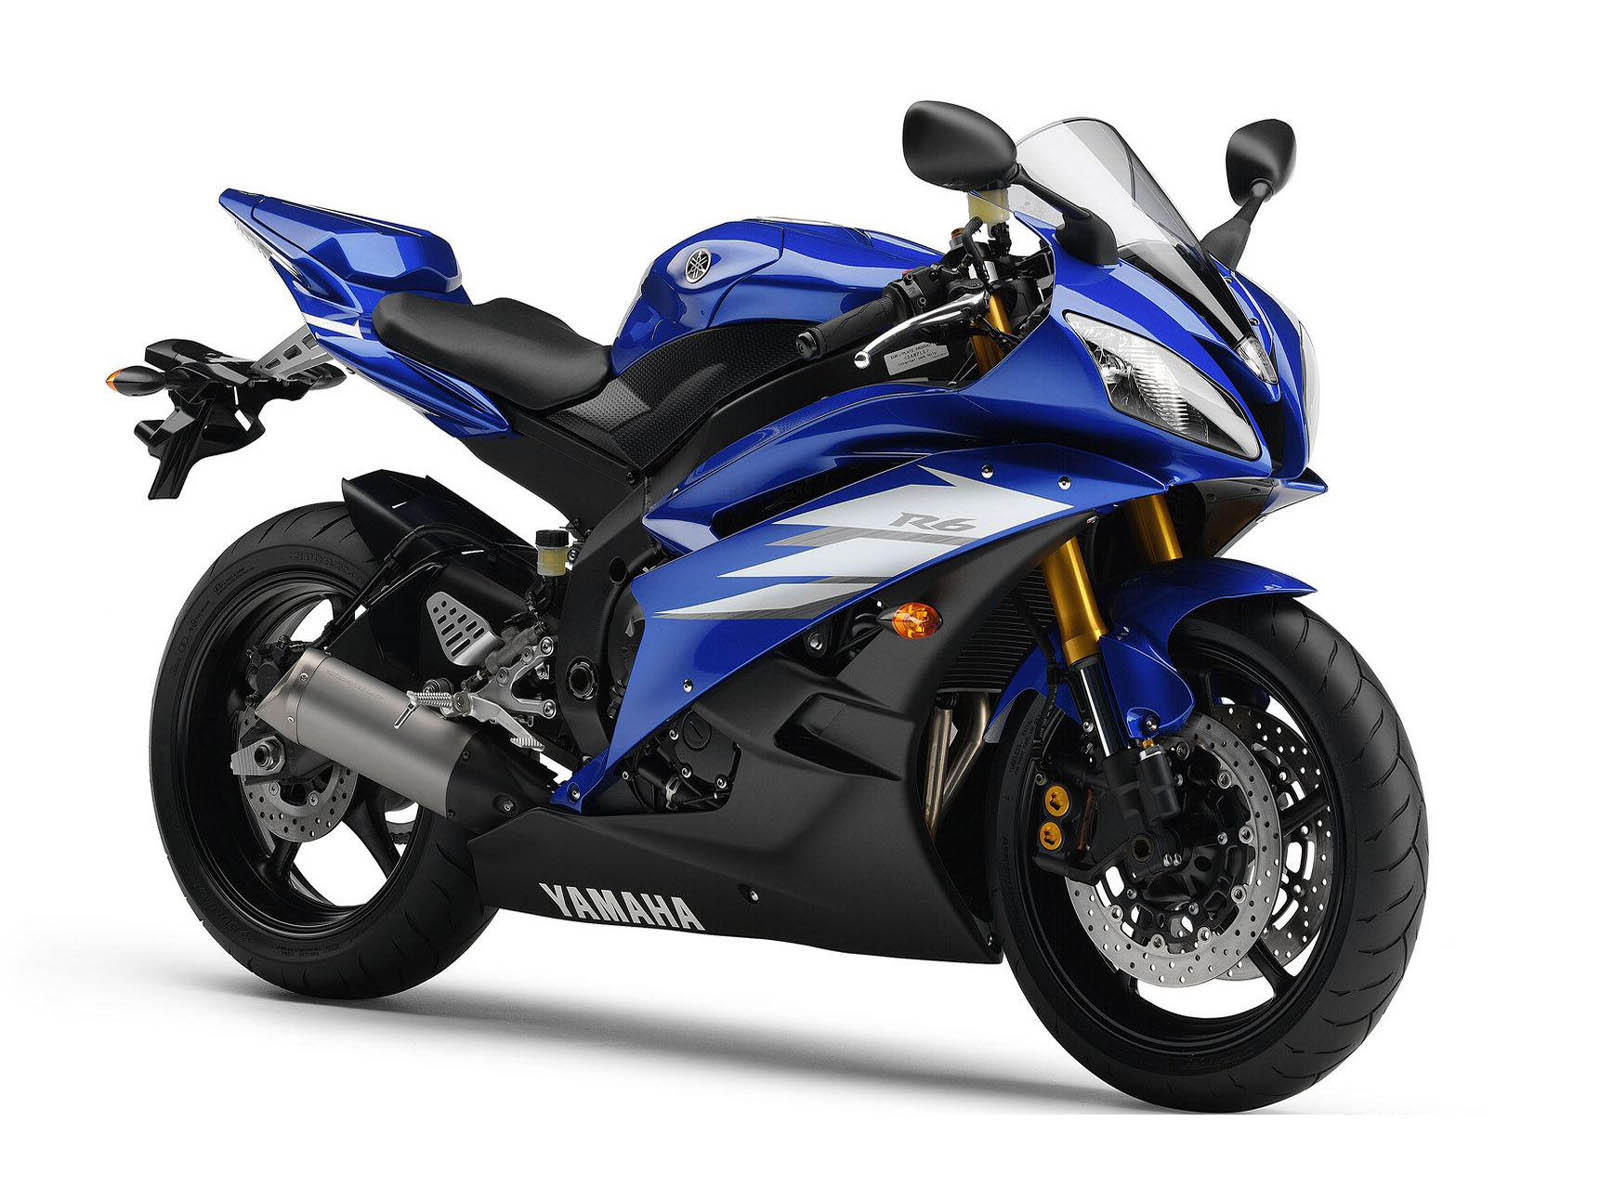 Tag Yamaha R6 Bike Wallpapers BackgroundsPhotos Images and 1600x1200